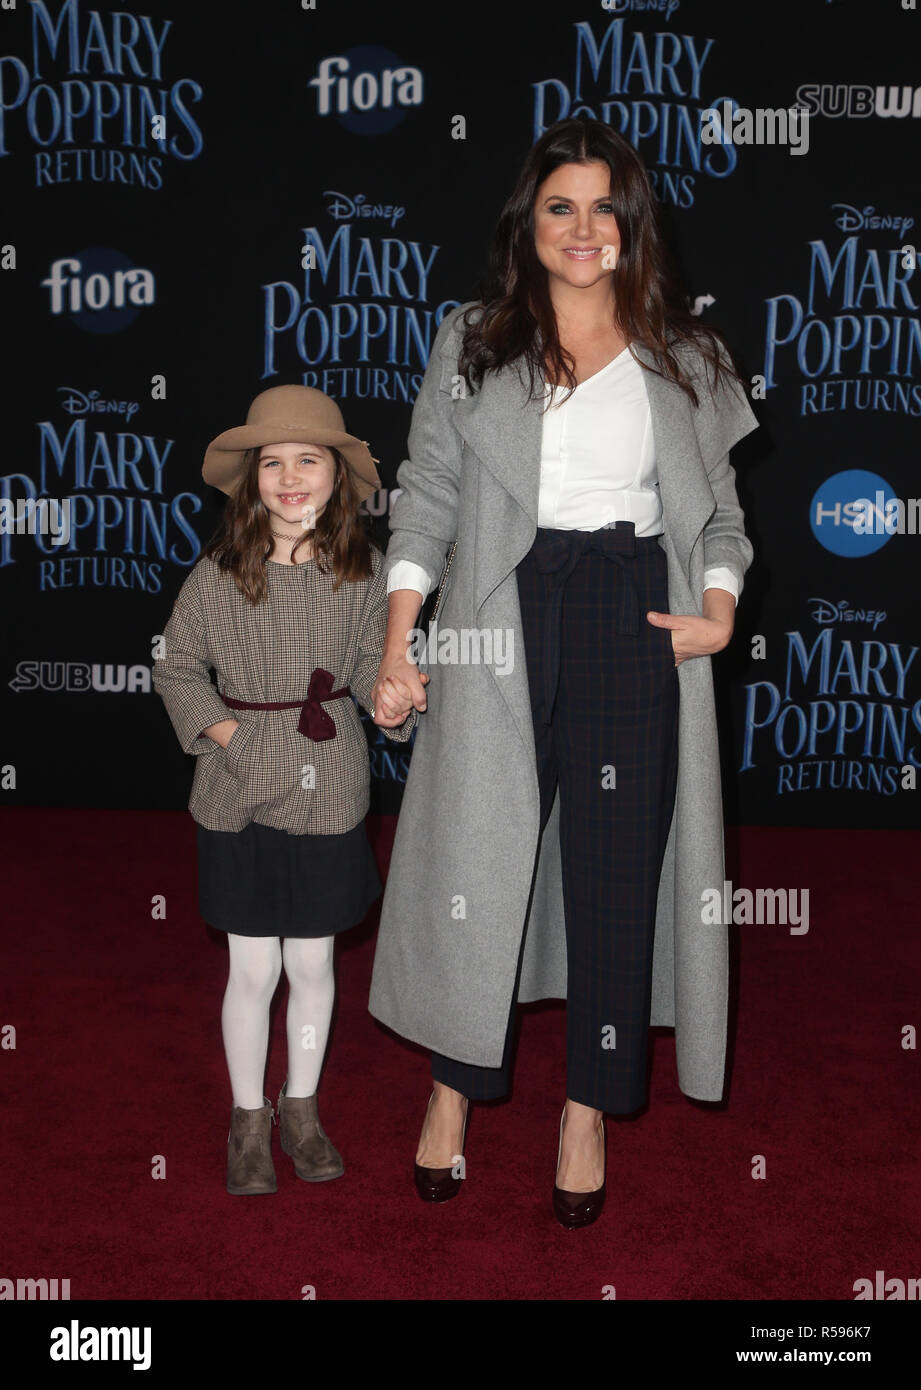 HOLLYWOOD, CA - NOVEMBER 29: Tiffani Thiessen, Harper Renn Smith, at the World Premiere of Disney’s Mary Poppins Returns at The Dolby Theater in Hollywood, California on November 29, 2018. Credit: Faye Sadou/MediaPunch Stock Photo